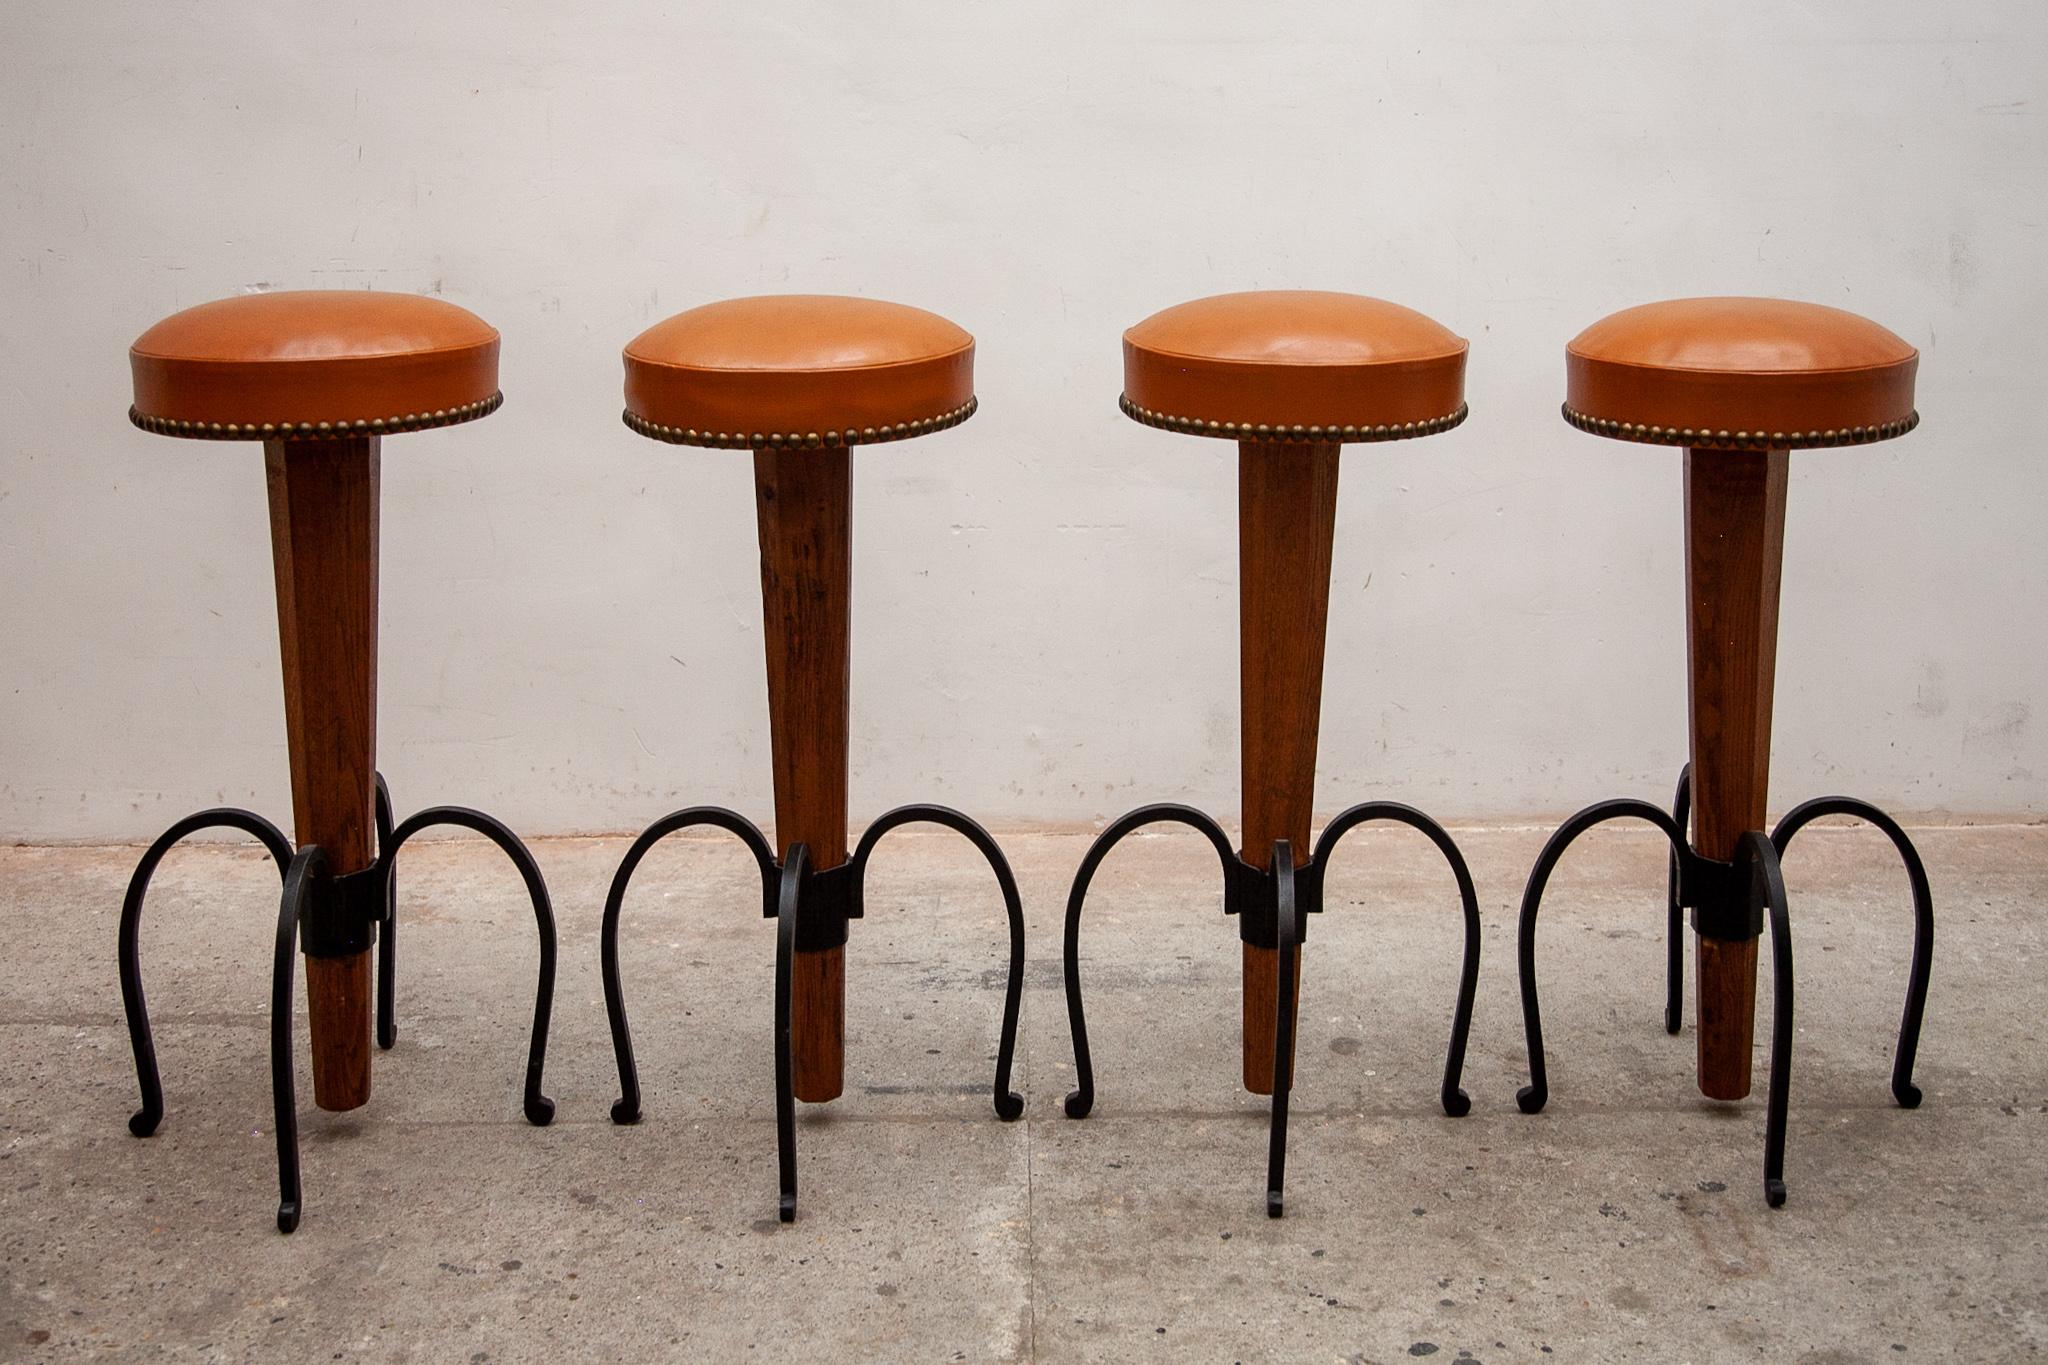 Set of four Brutalist Stools Wrought Iron, Round Camel Leather Seats 2